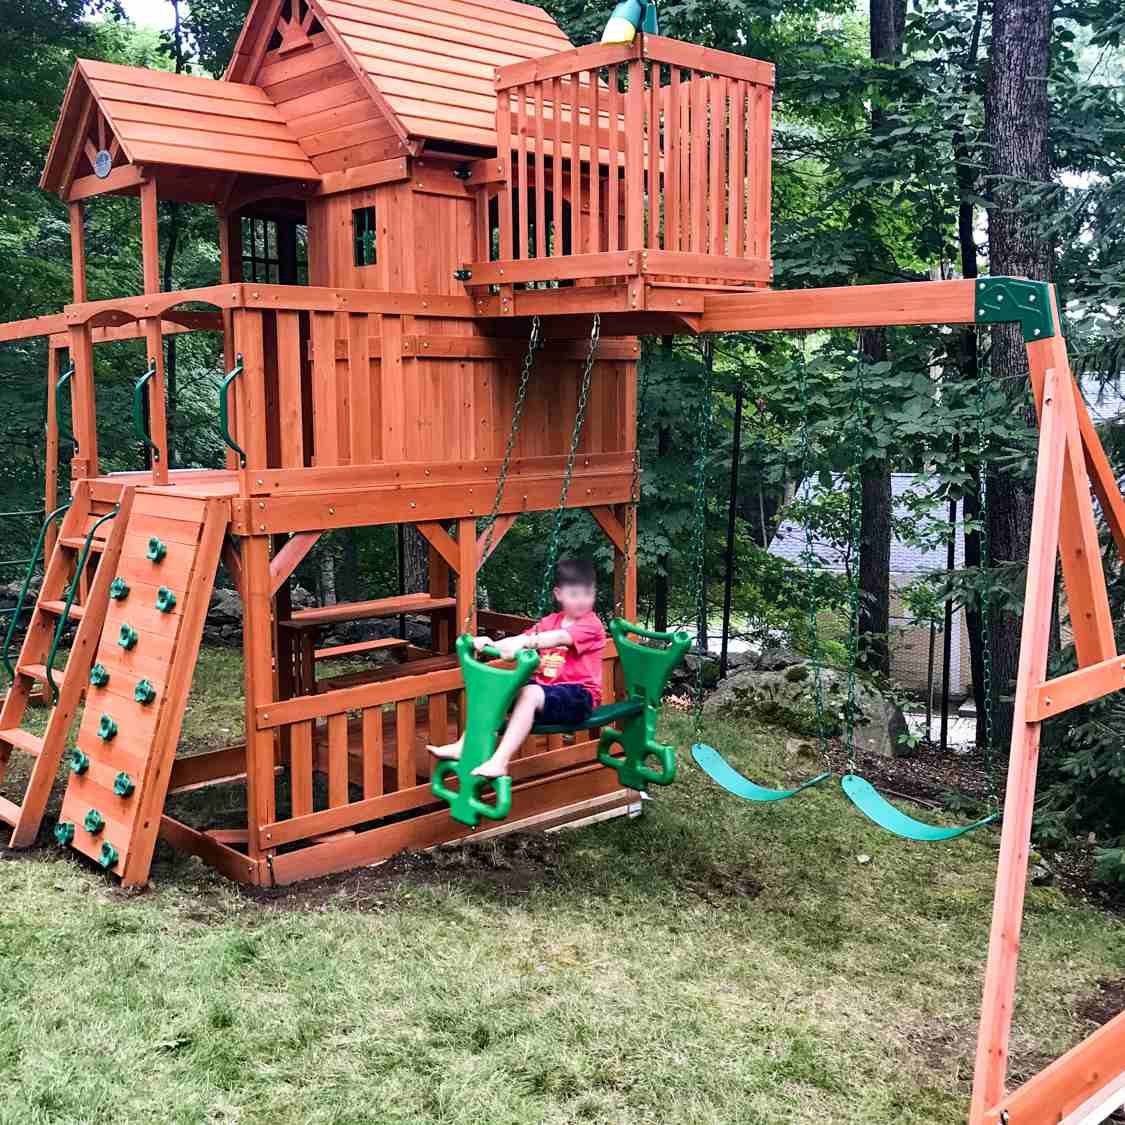 How To Make Your Own Diy Jungle Gym